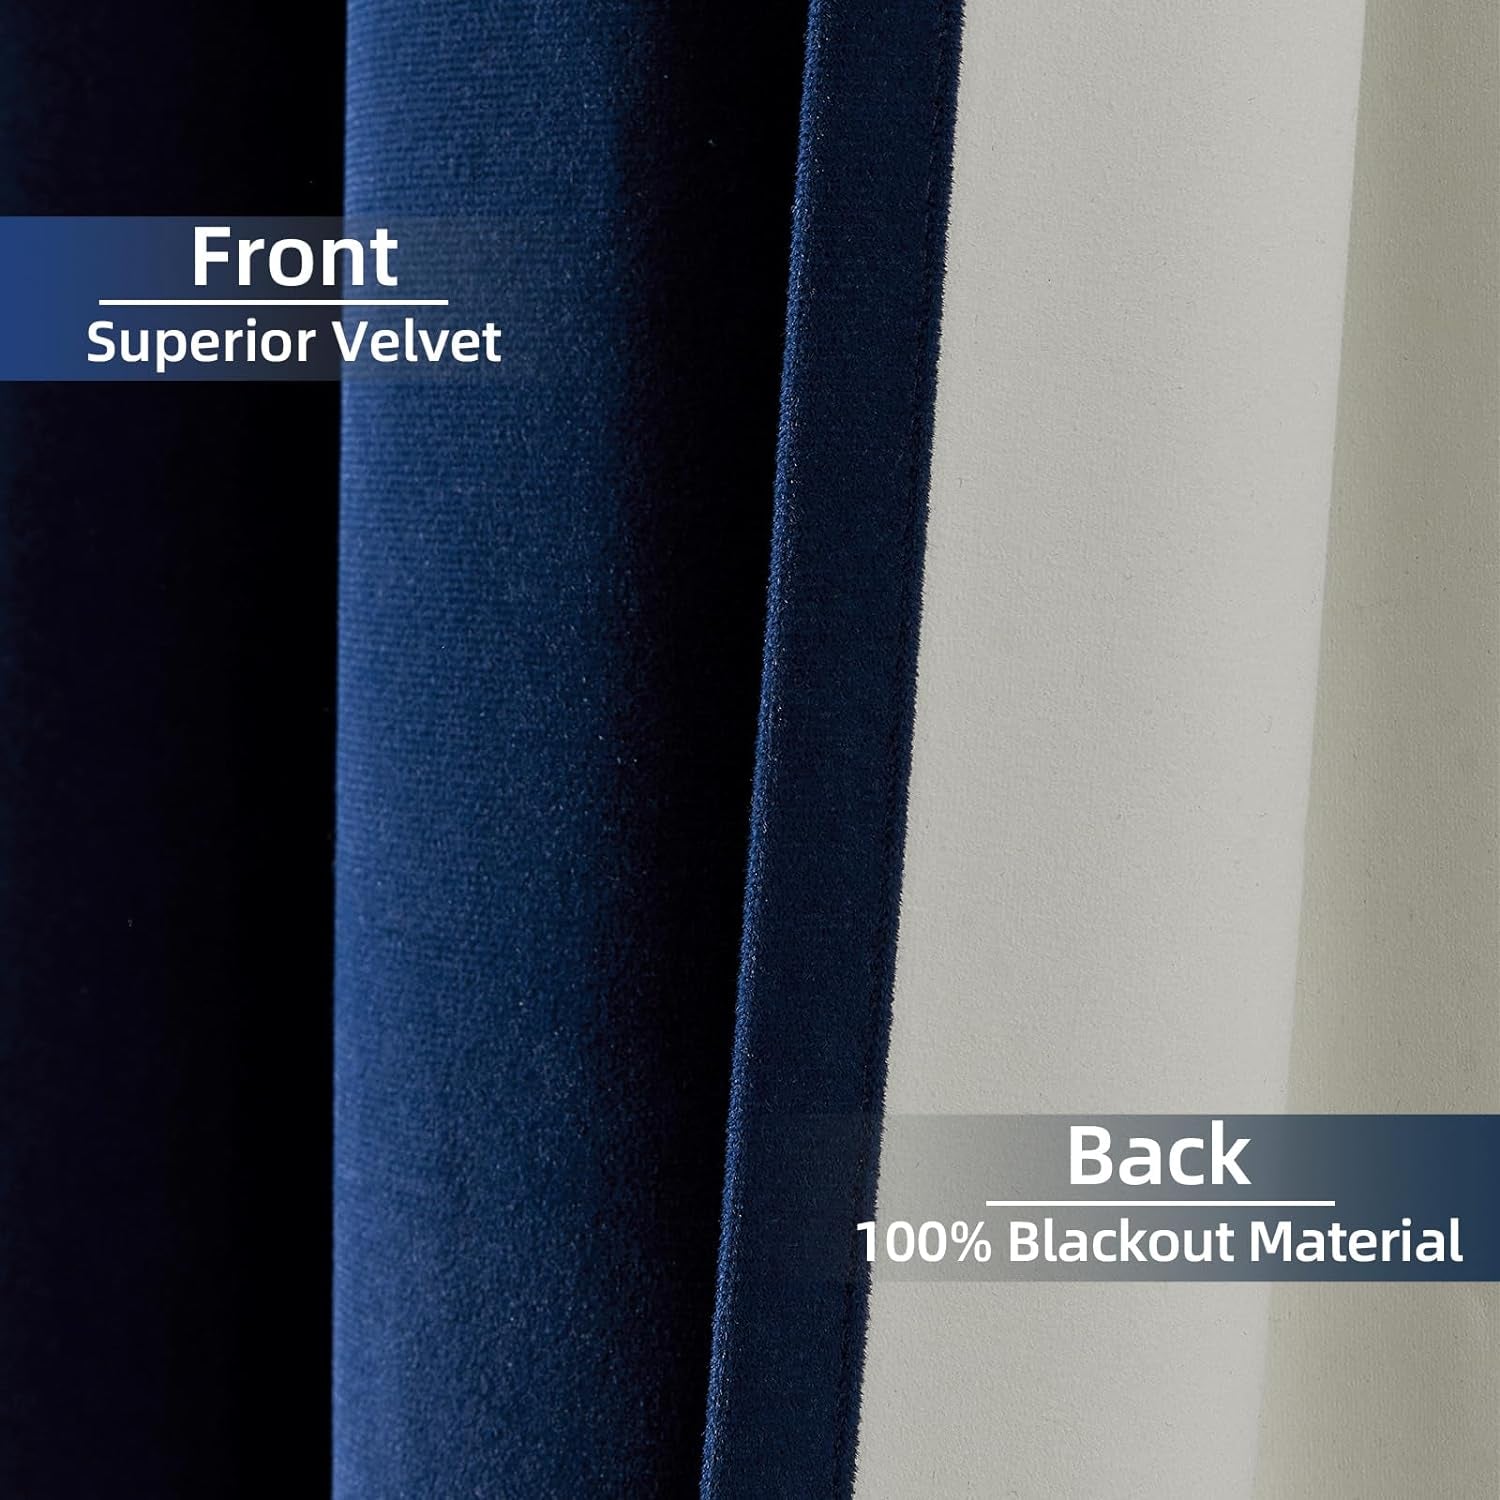 Joydeco Navy Blue 100% Blackout Curtains 90 Inch Curtains 2 Panels Set, Black Out Curtain for Bedroom, Grommet Heavy Luxury Thermal Insulated Velvet Curtains for Living Room Home Theater, 52W X 90L  Joydeco   